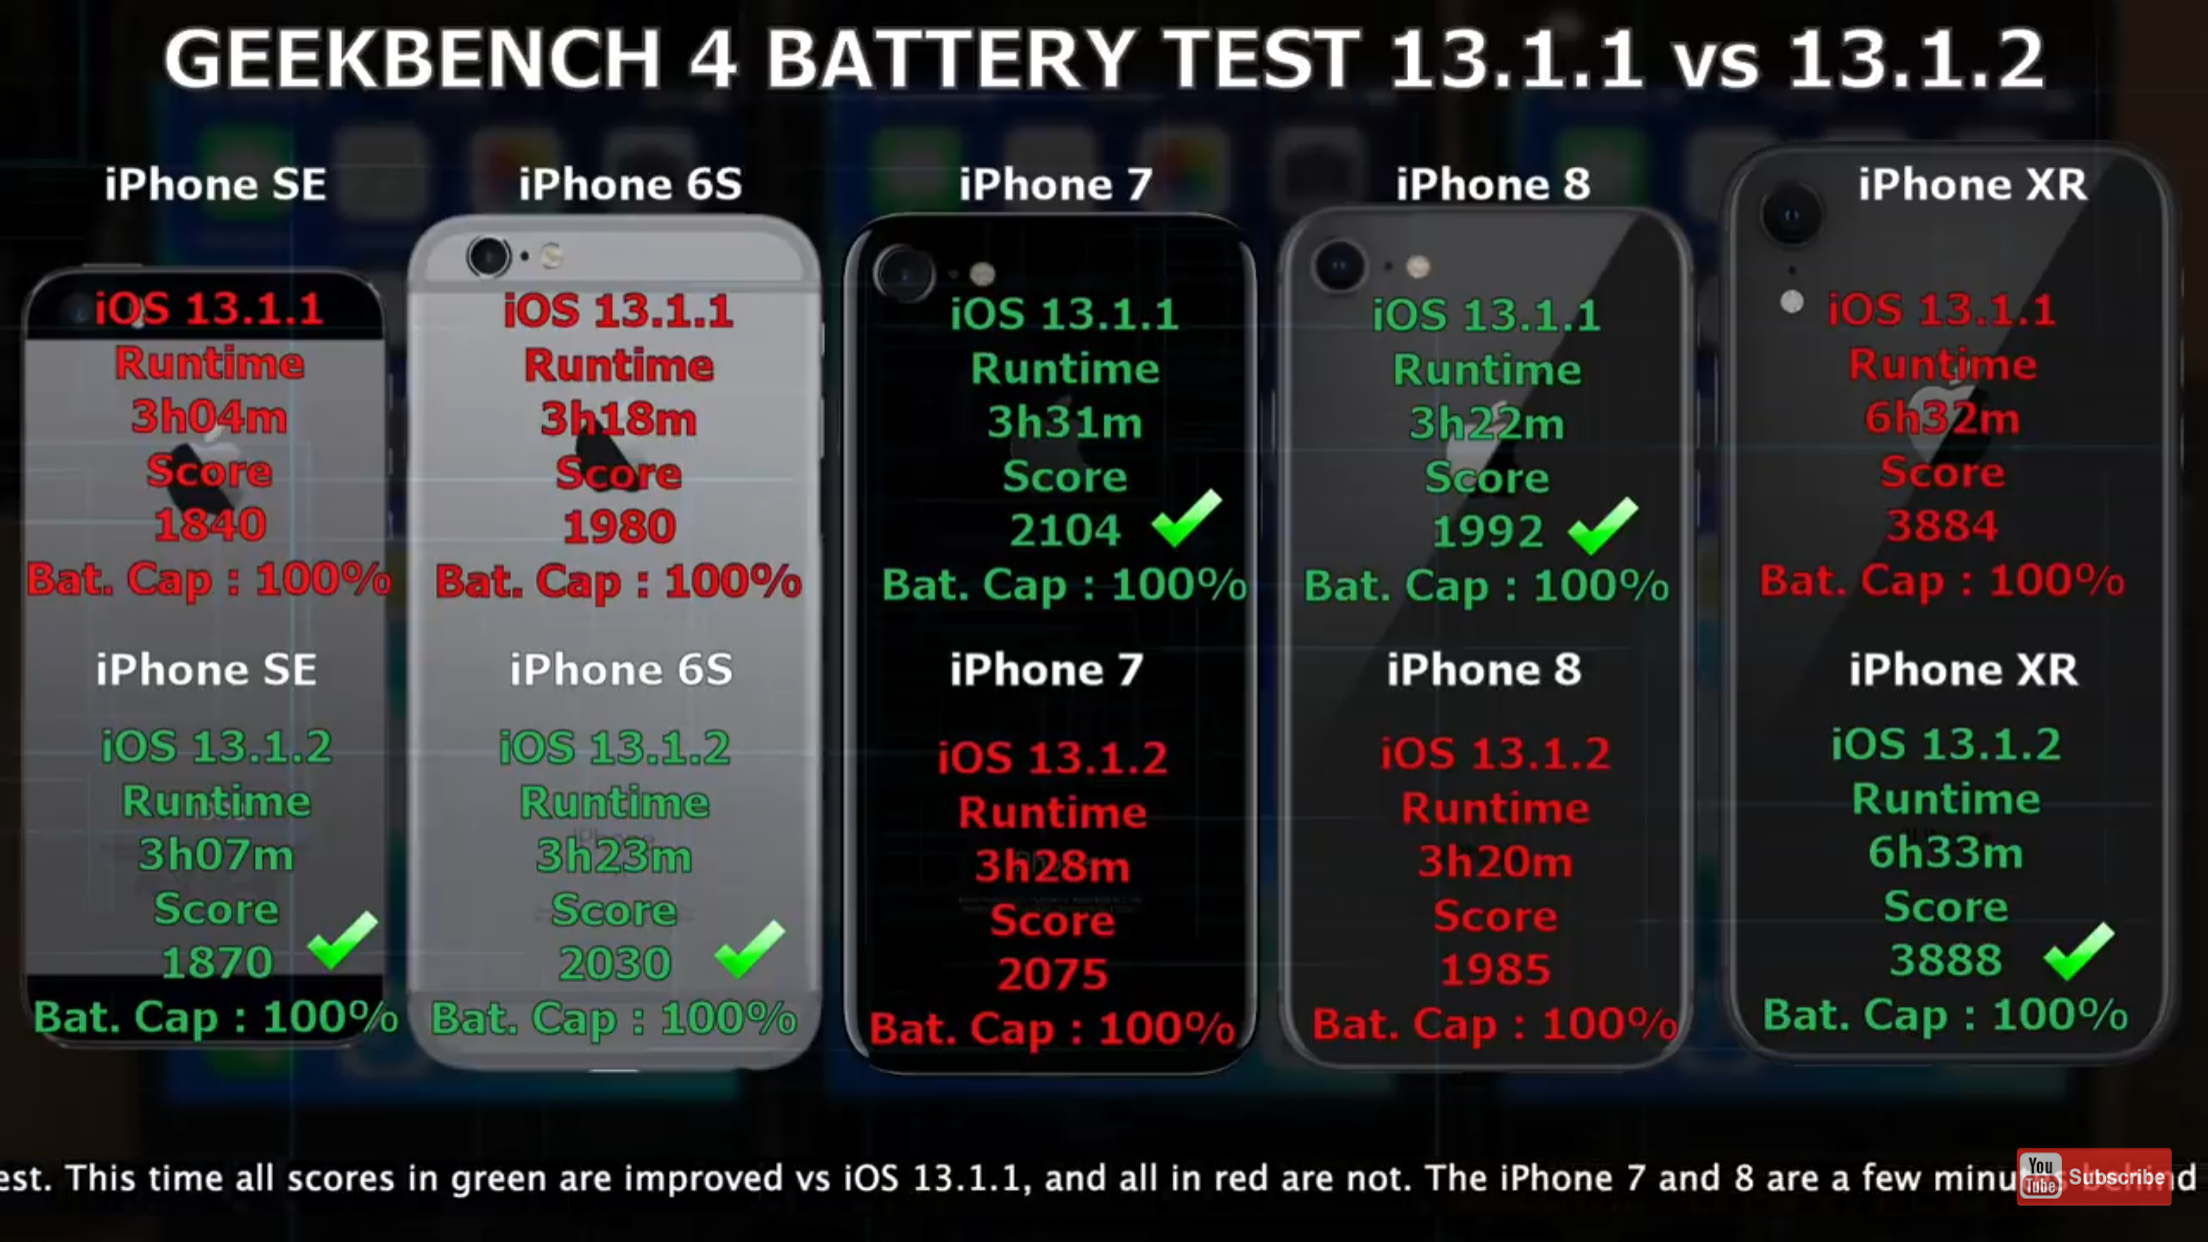 GEEKBENCH 4 BATTERY TEST iOS 13.1.1 vs 13.1.2 (iPhone SE, 6s, 7, 8, XR)